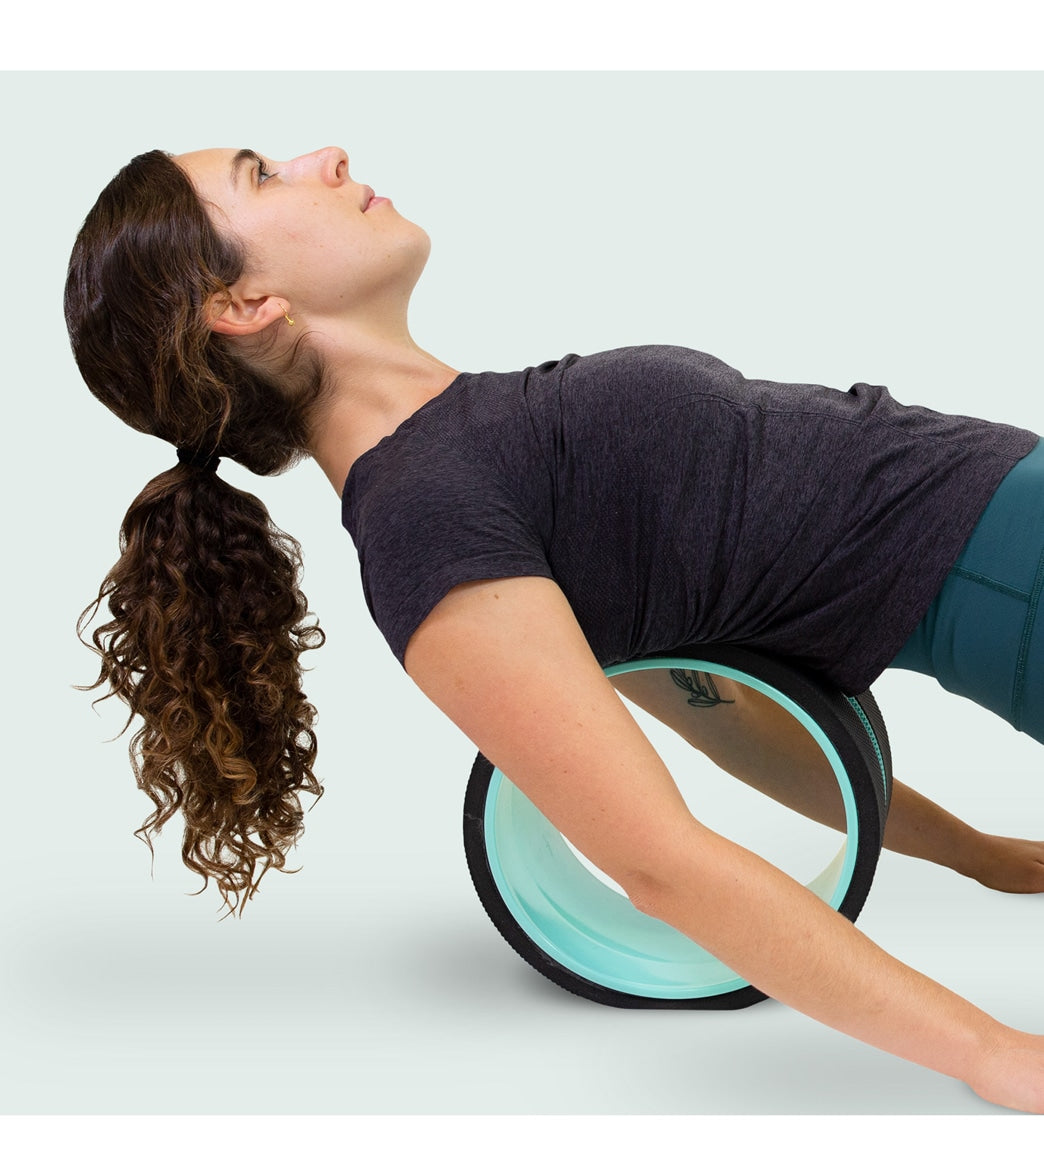 Best Yoga Wheels for a More Effective and Comfortable Practice